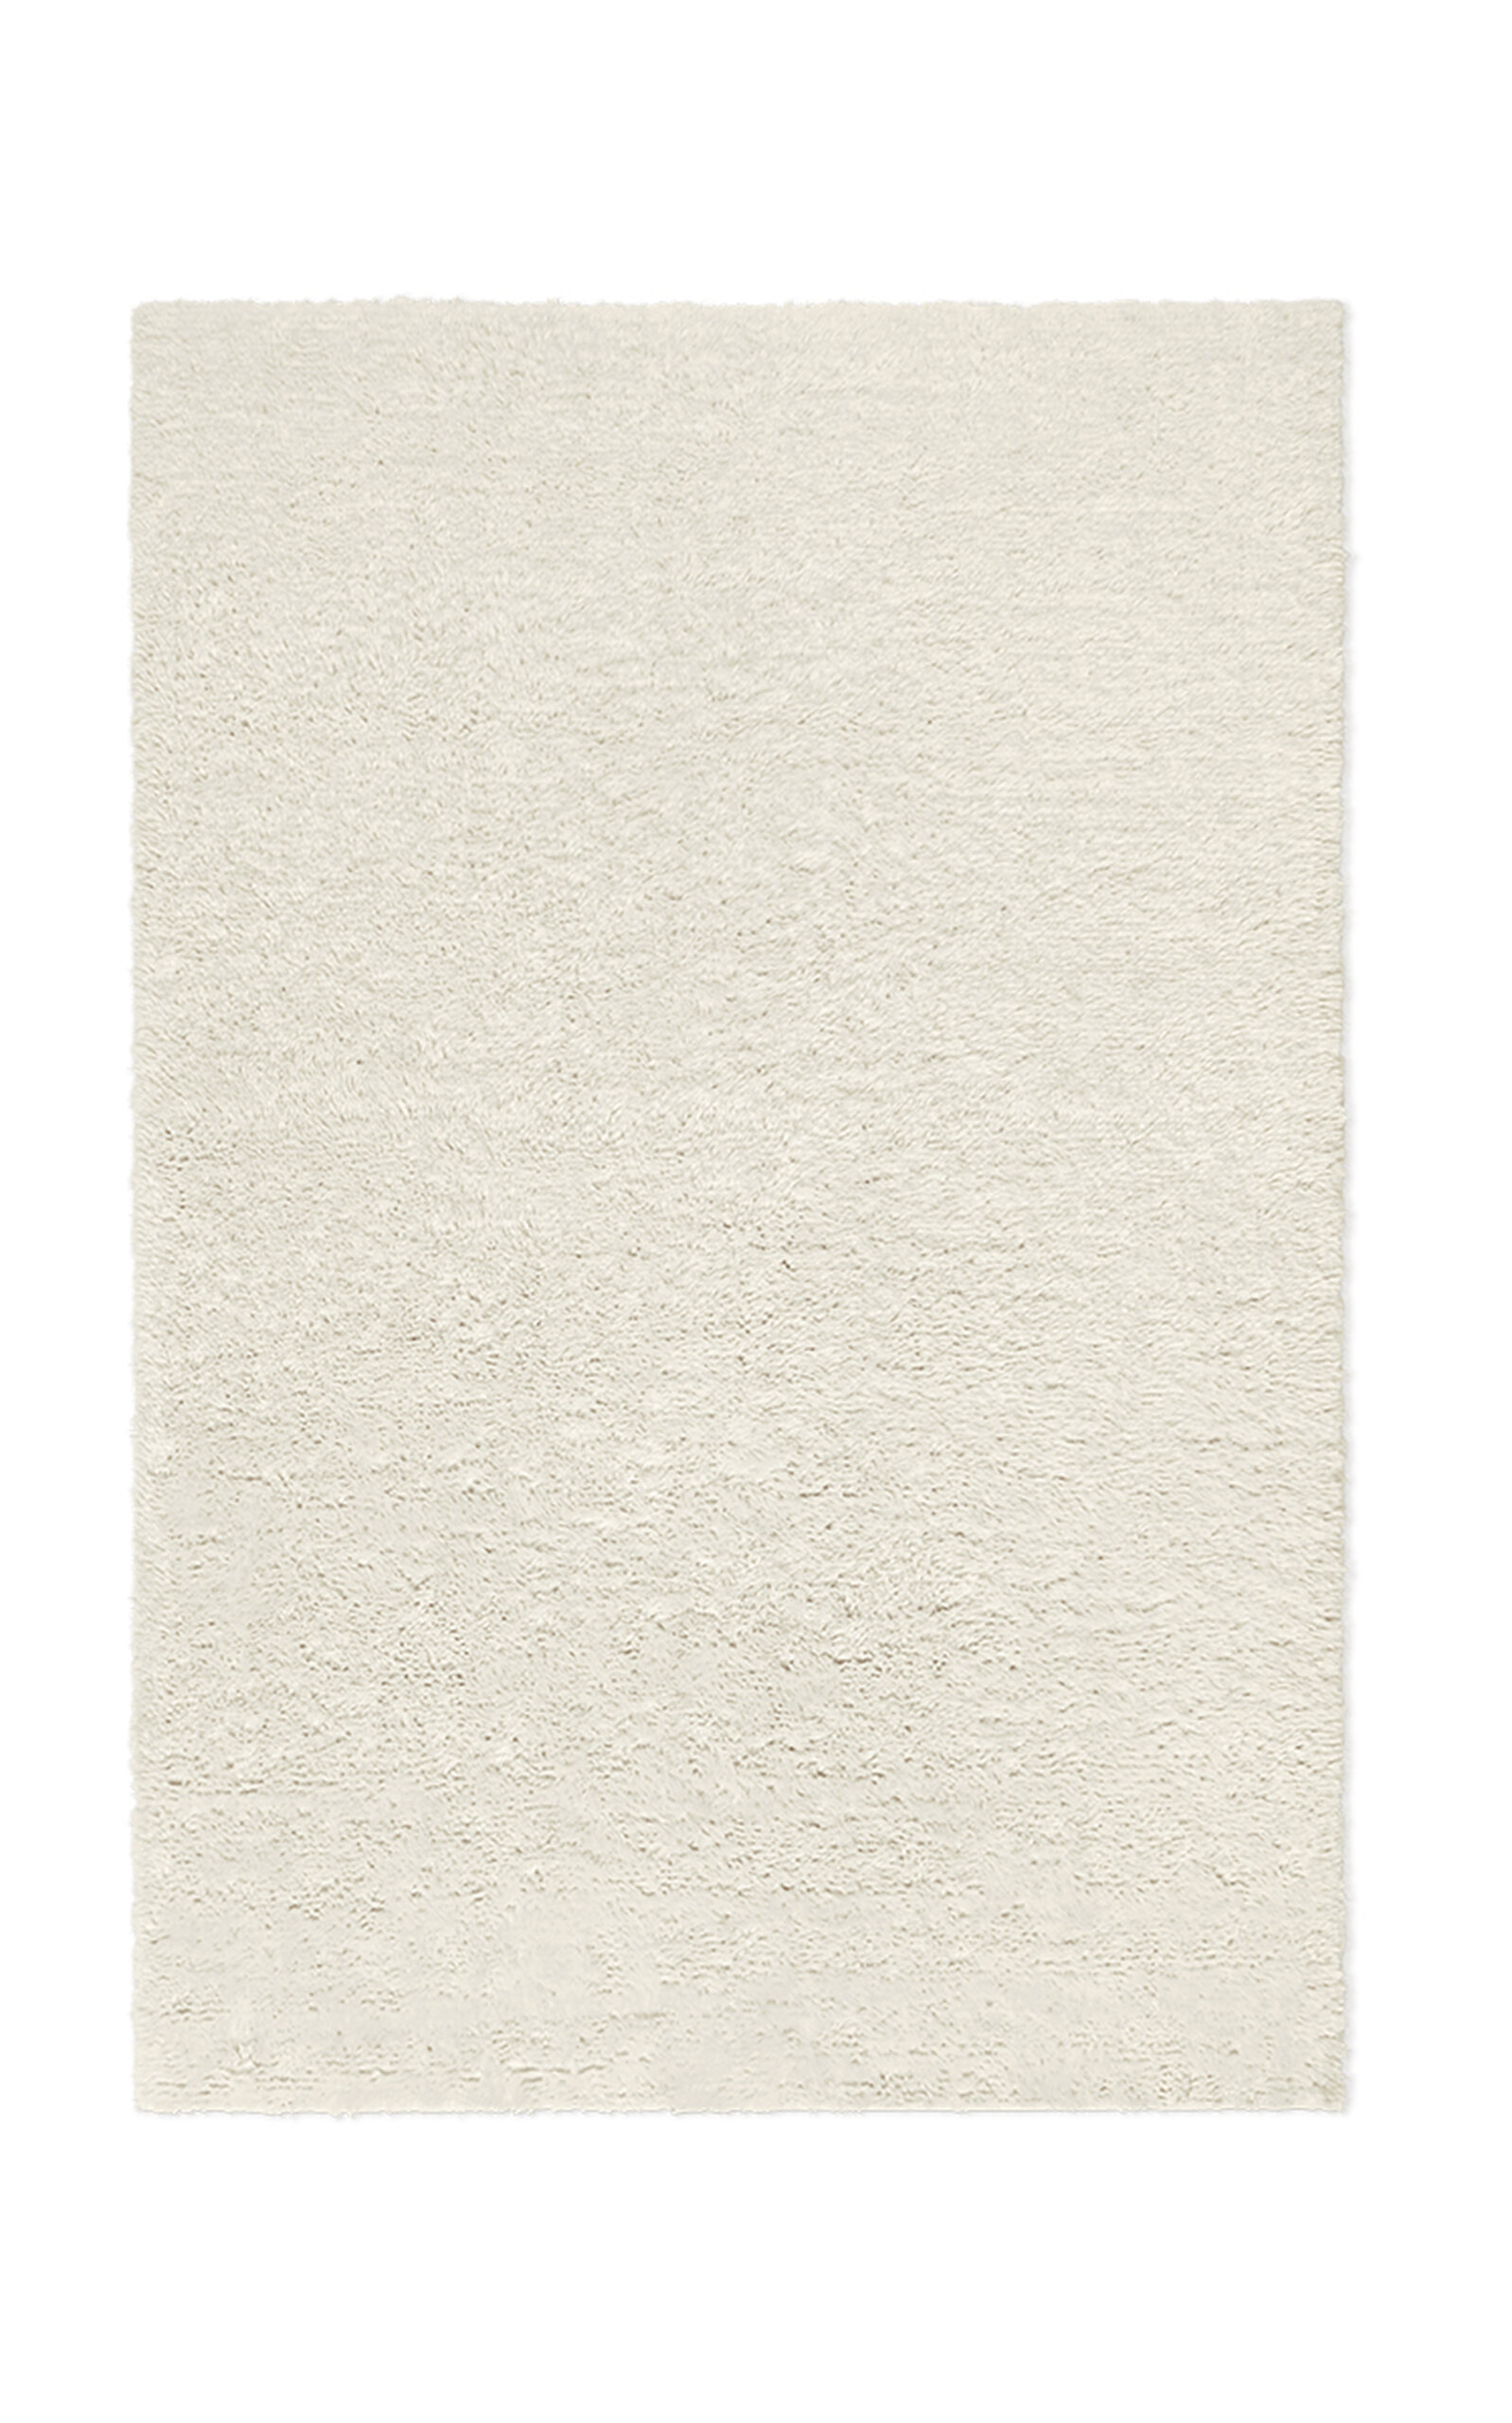 Nordic Knots Fields By ; Shaggy Area Rug In Dusty White; Size 10' X 14' In Off-white